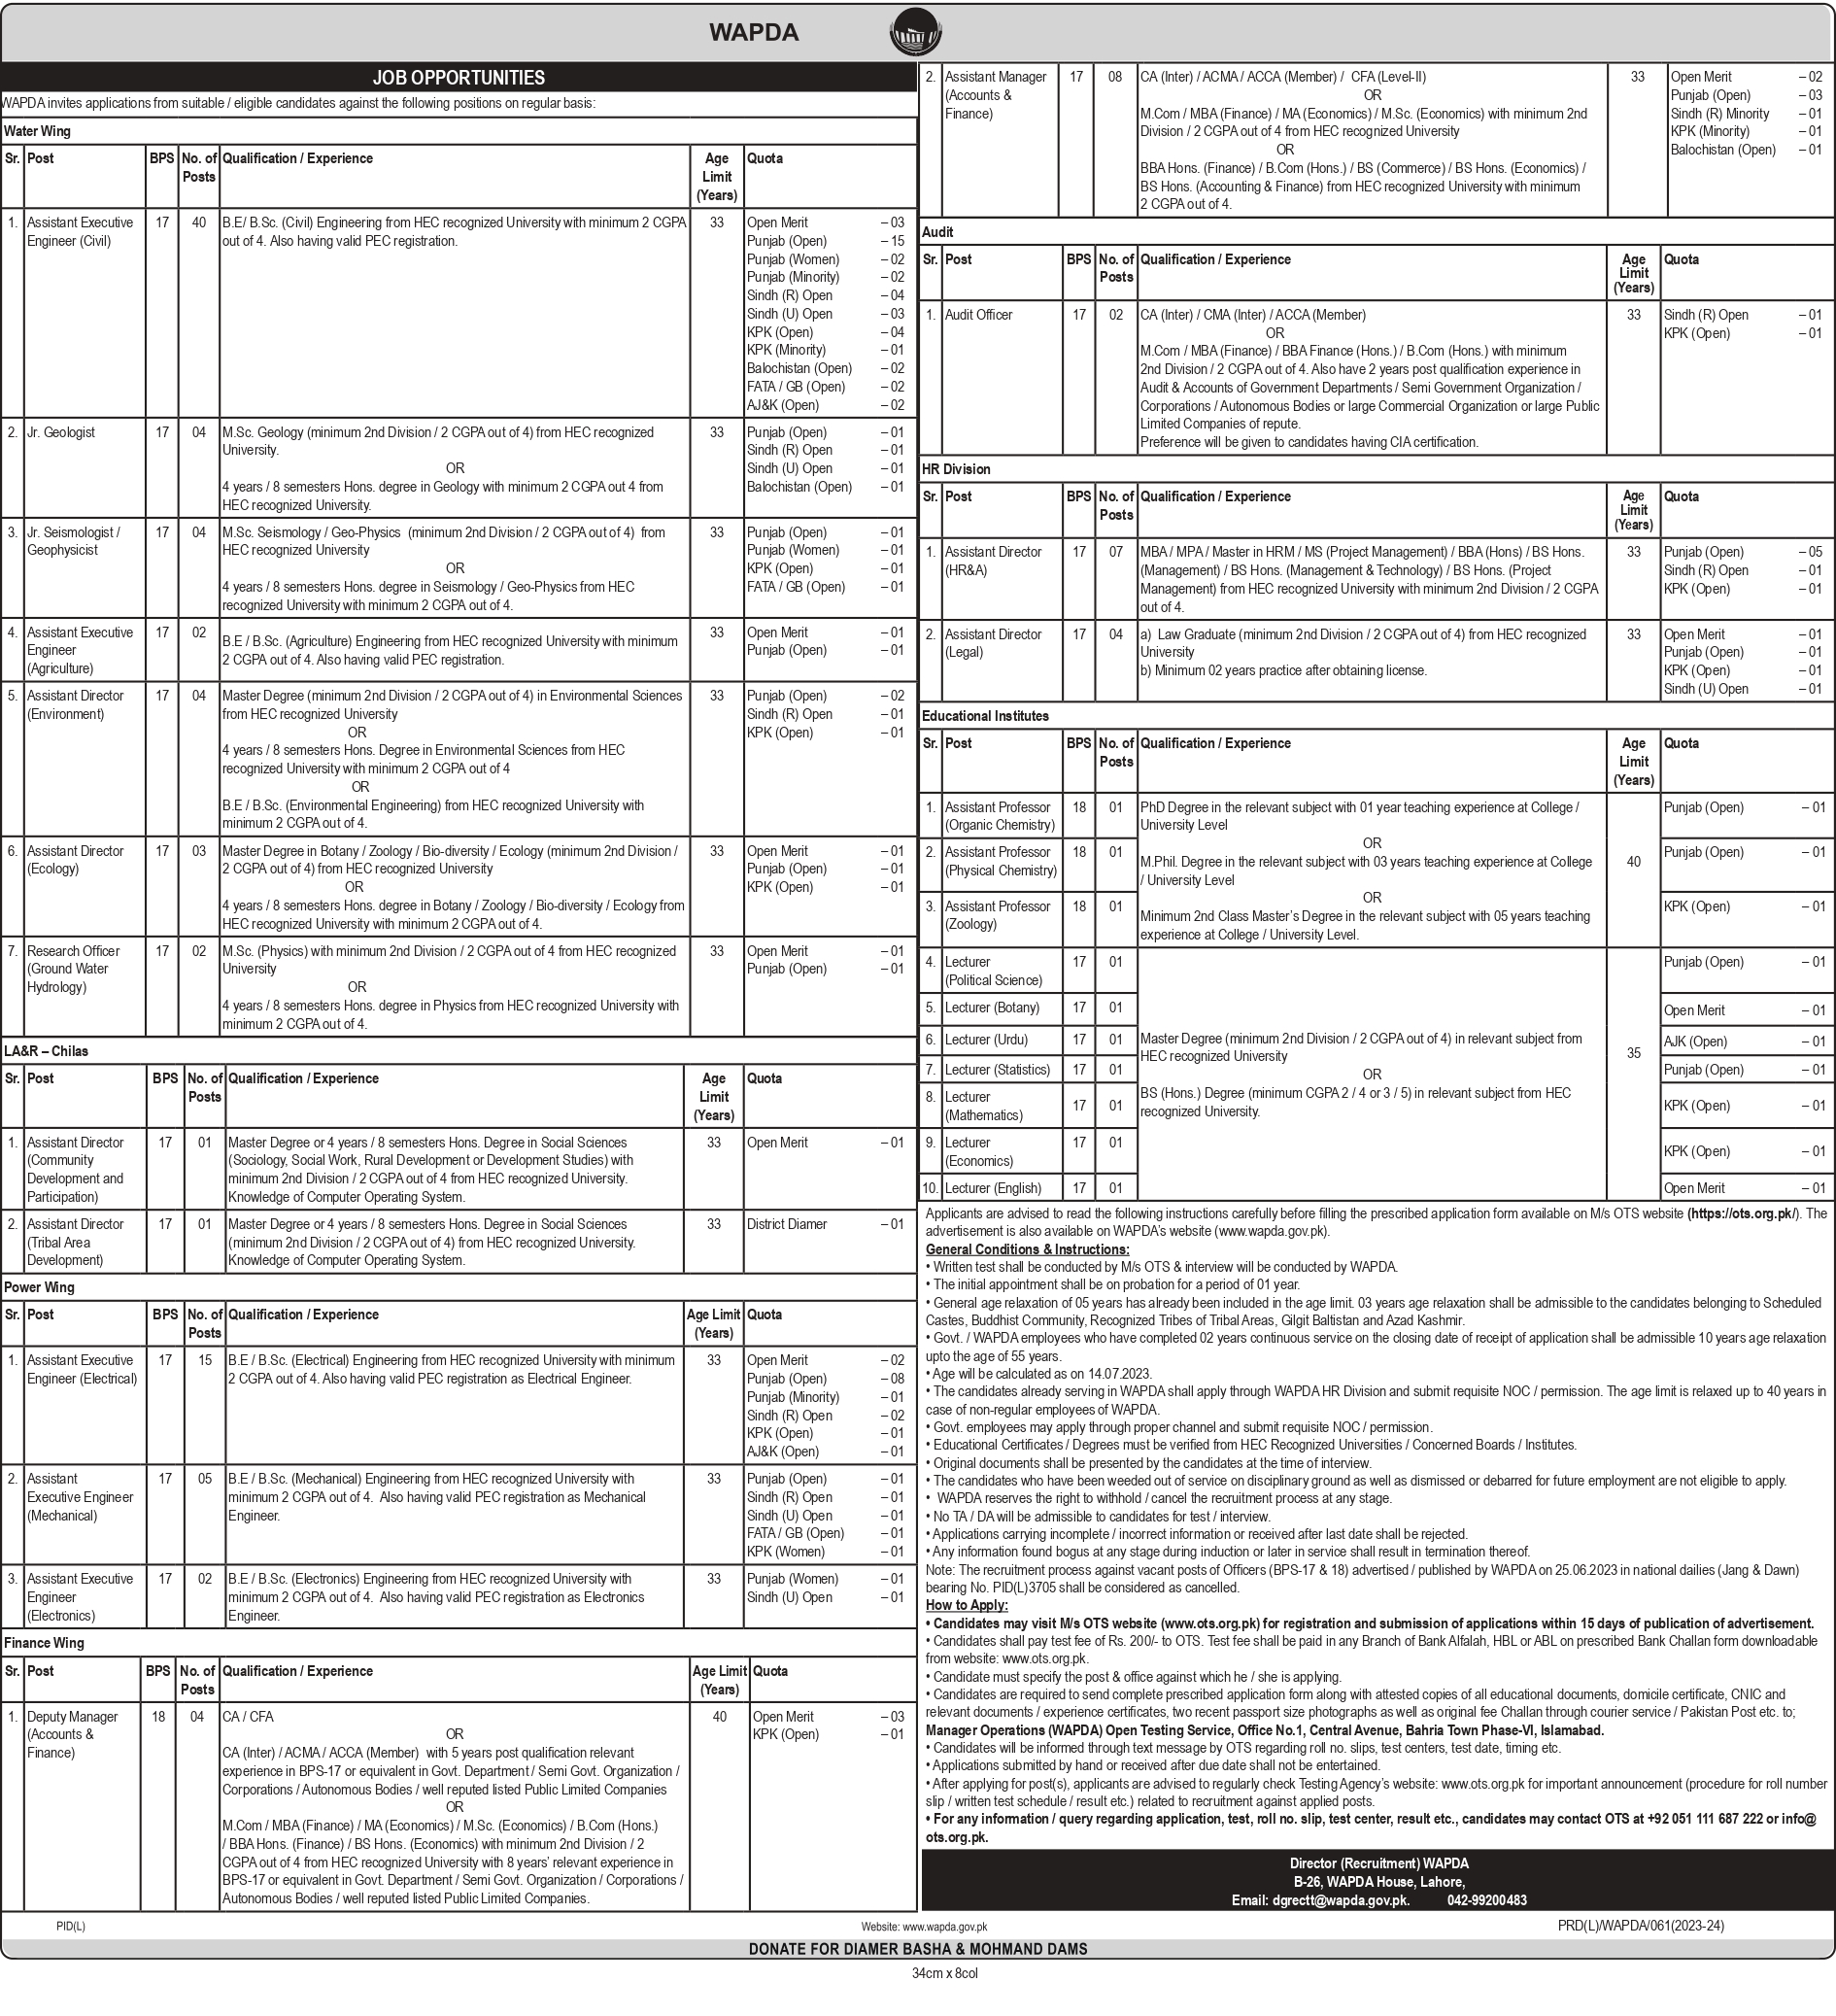 WAPDA jobs for Numerous New positions latest in 2023